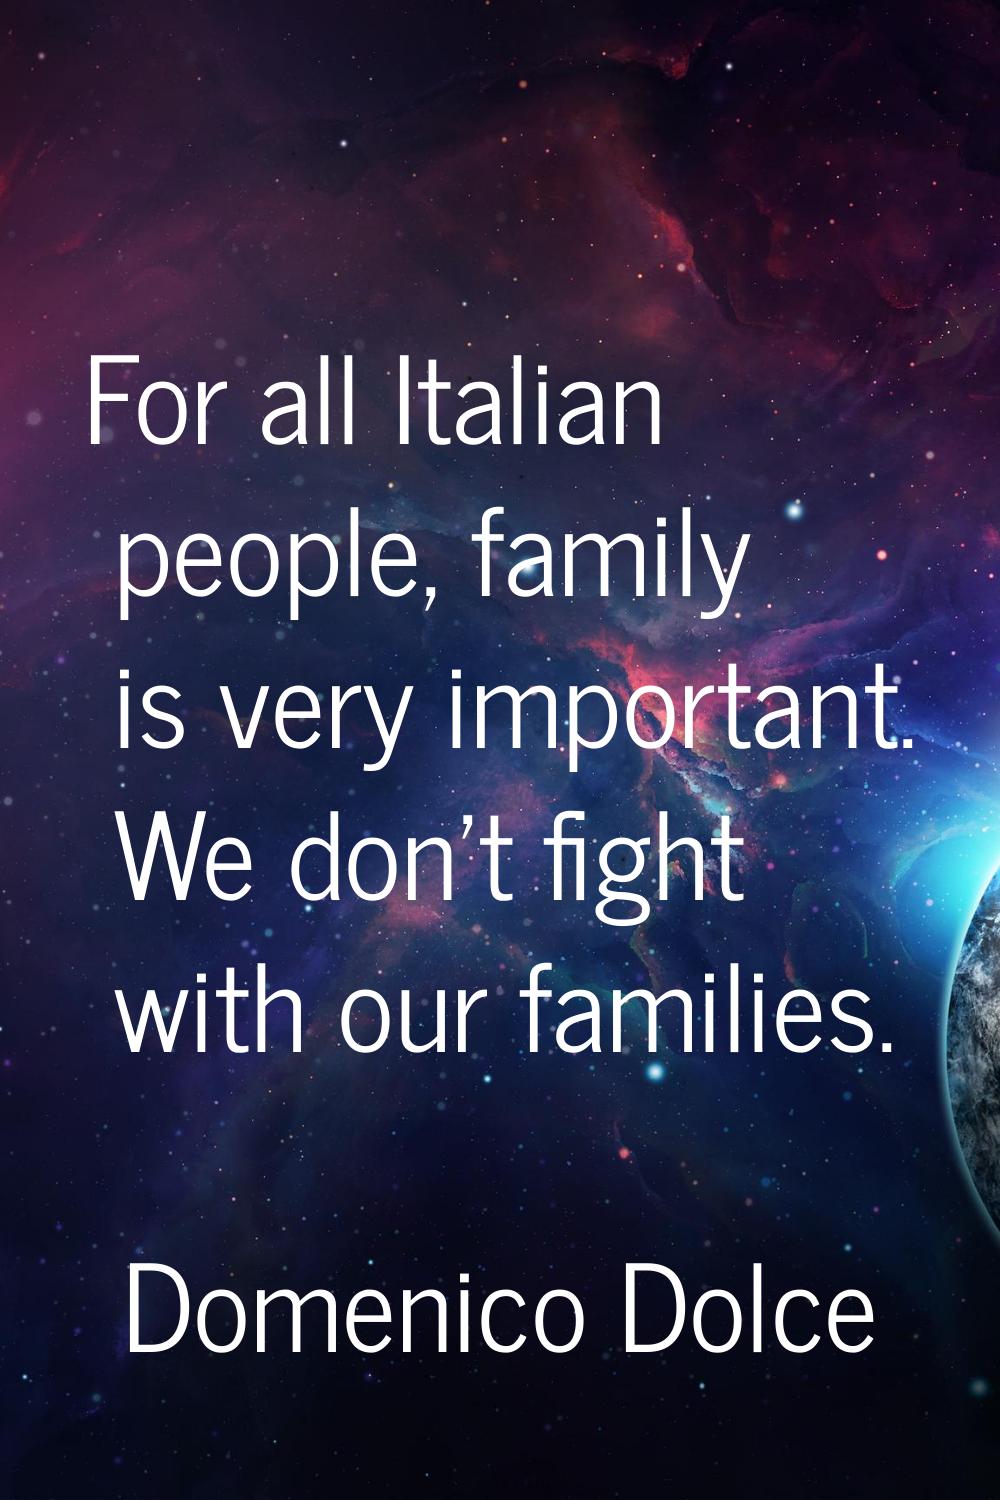 For all Italian people, family is very important. We don't fight with our families.